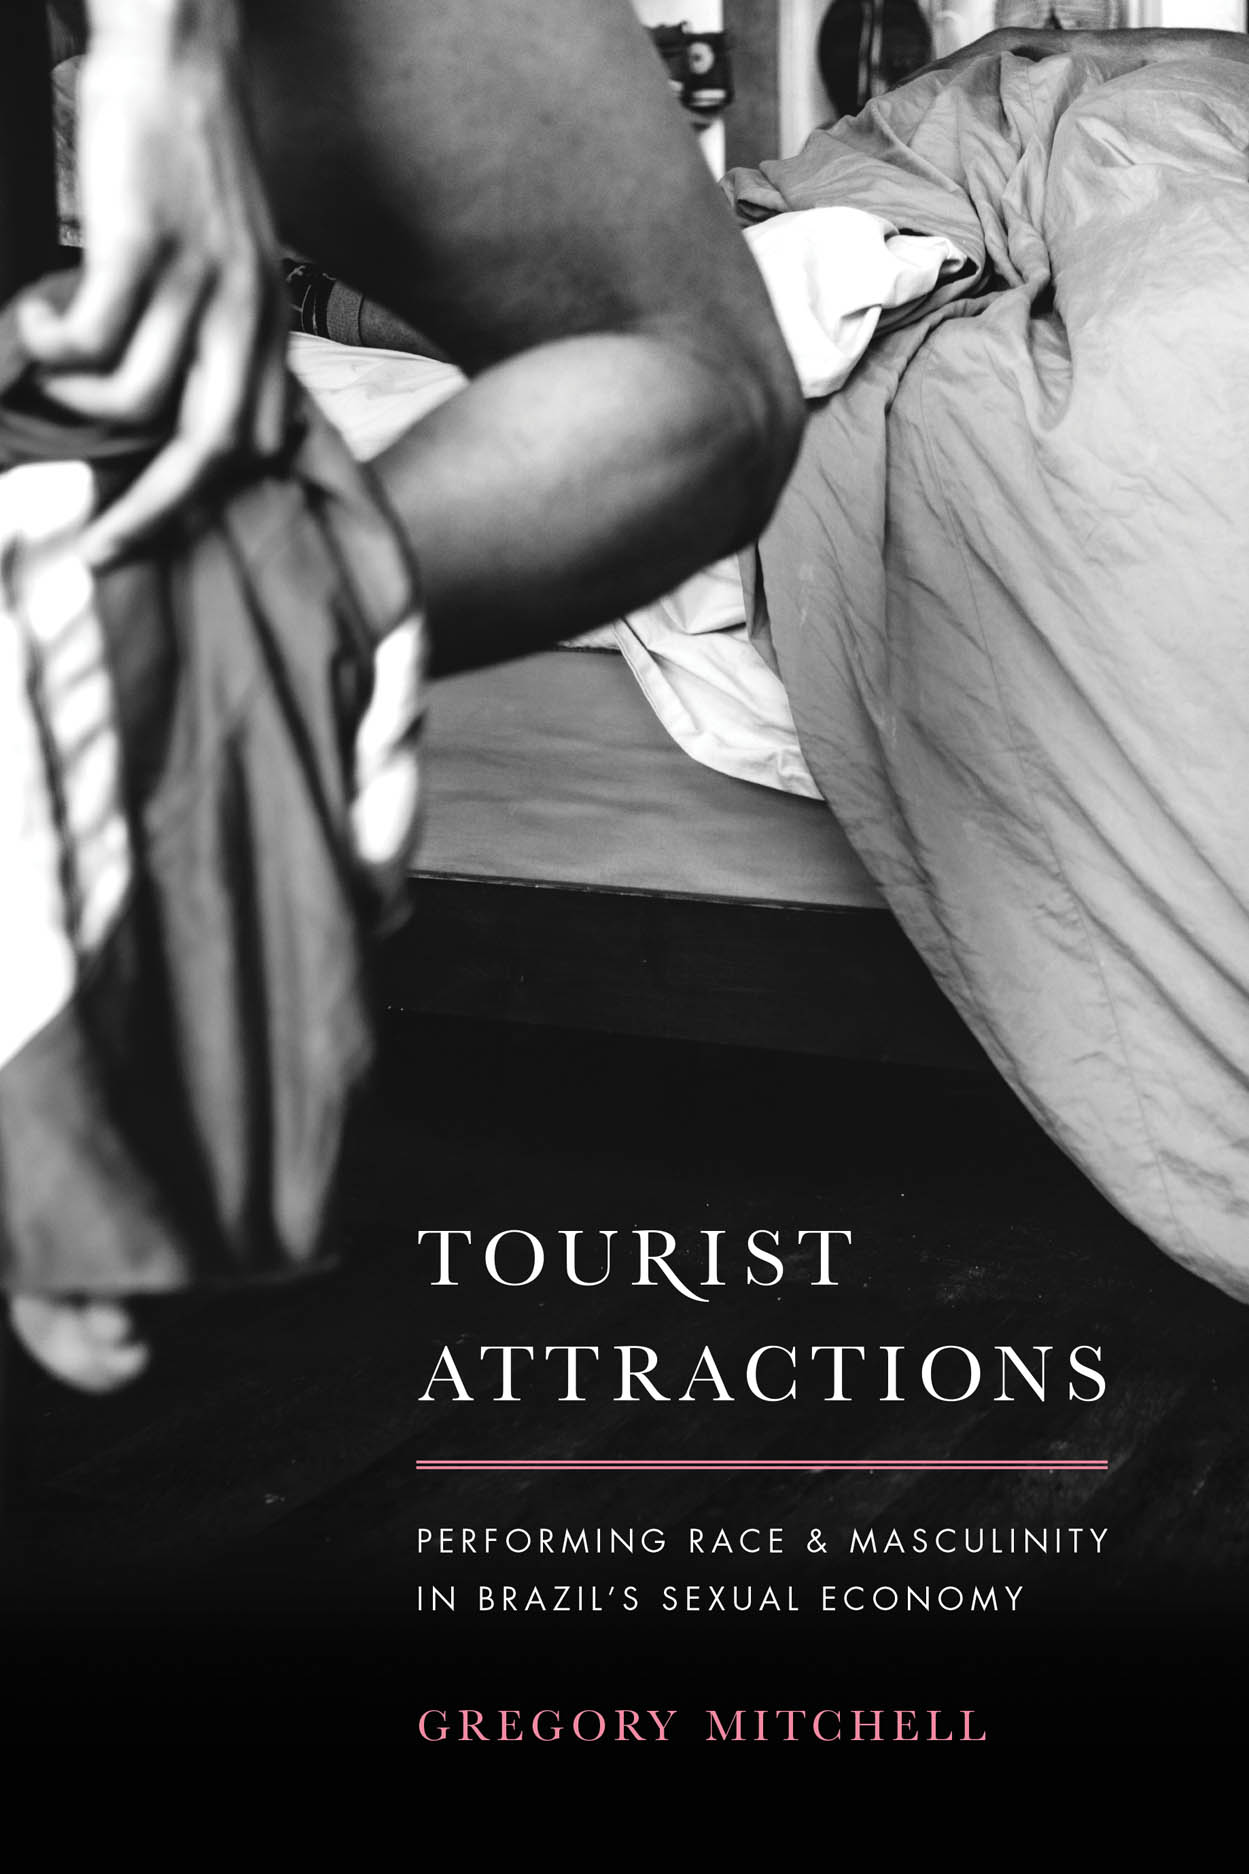 Tourist Attractions Performing Race and Masculinity in Brazils Sexual Economy, Mitchell pic image